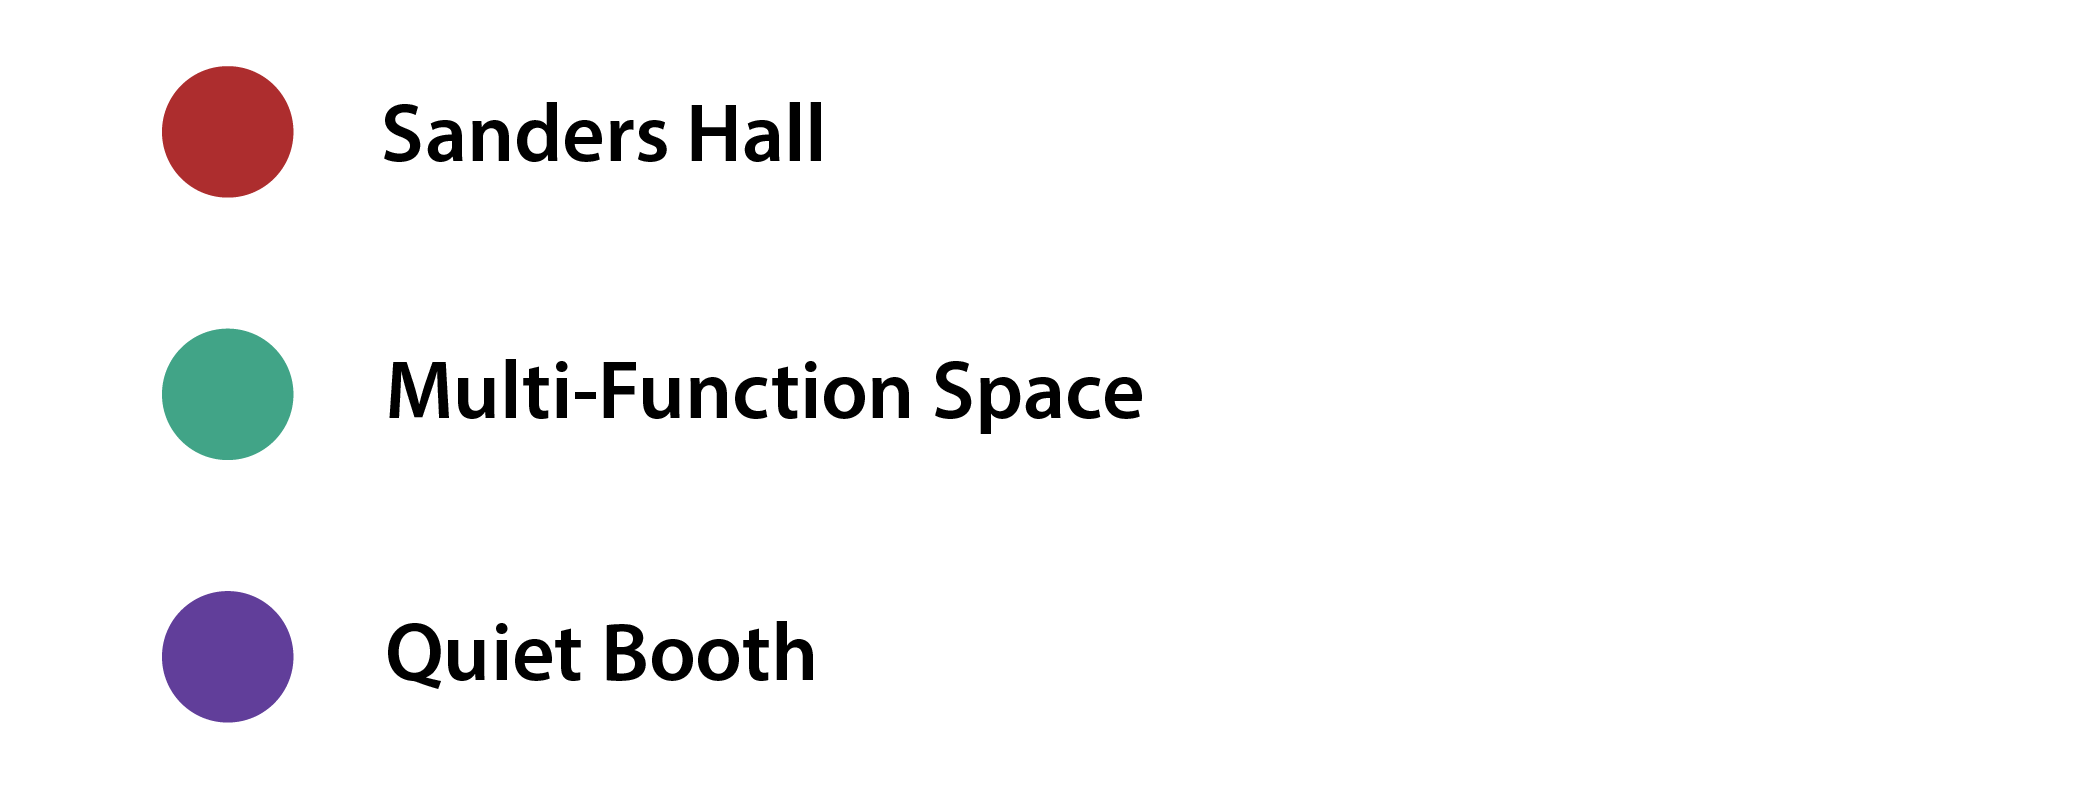 Calendar key: red for Sanders Hall, green for the Multi-Function Space, and purple for the quiet booth.